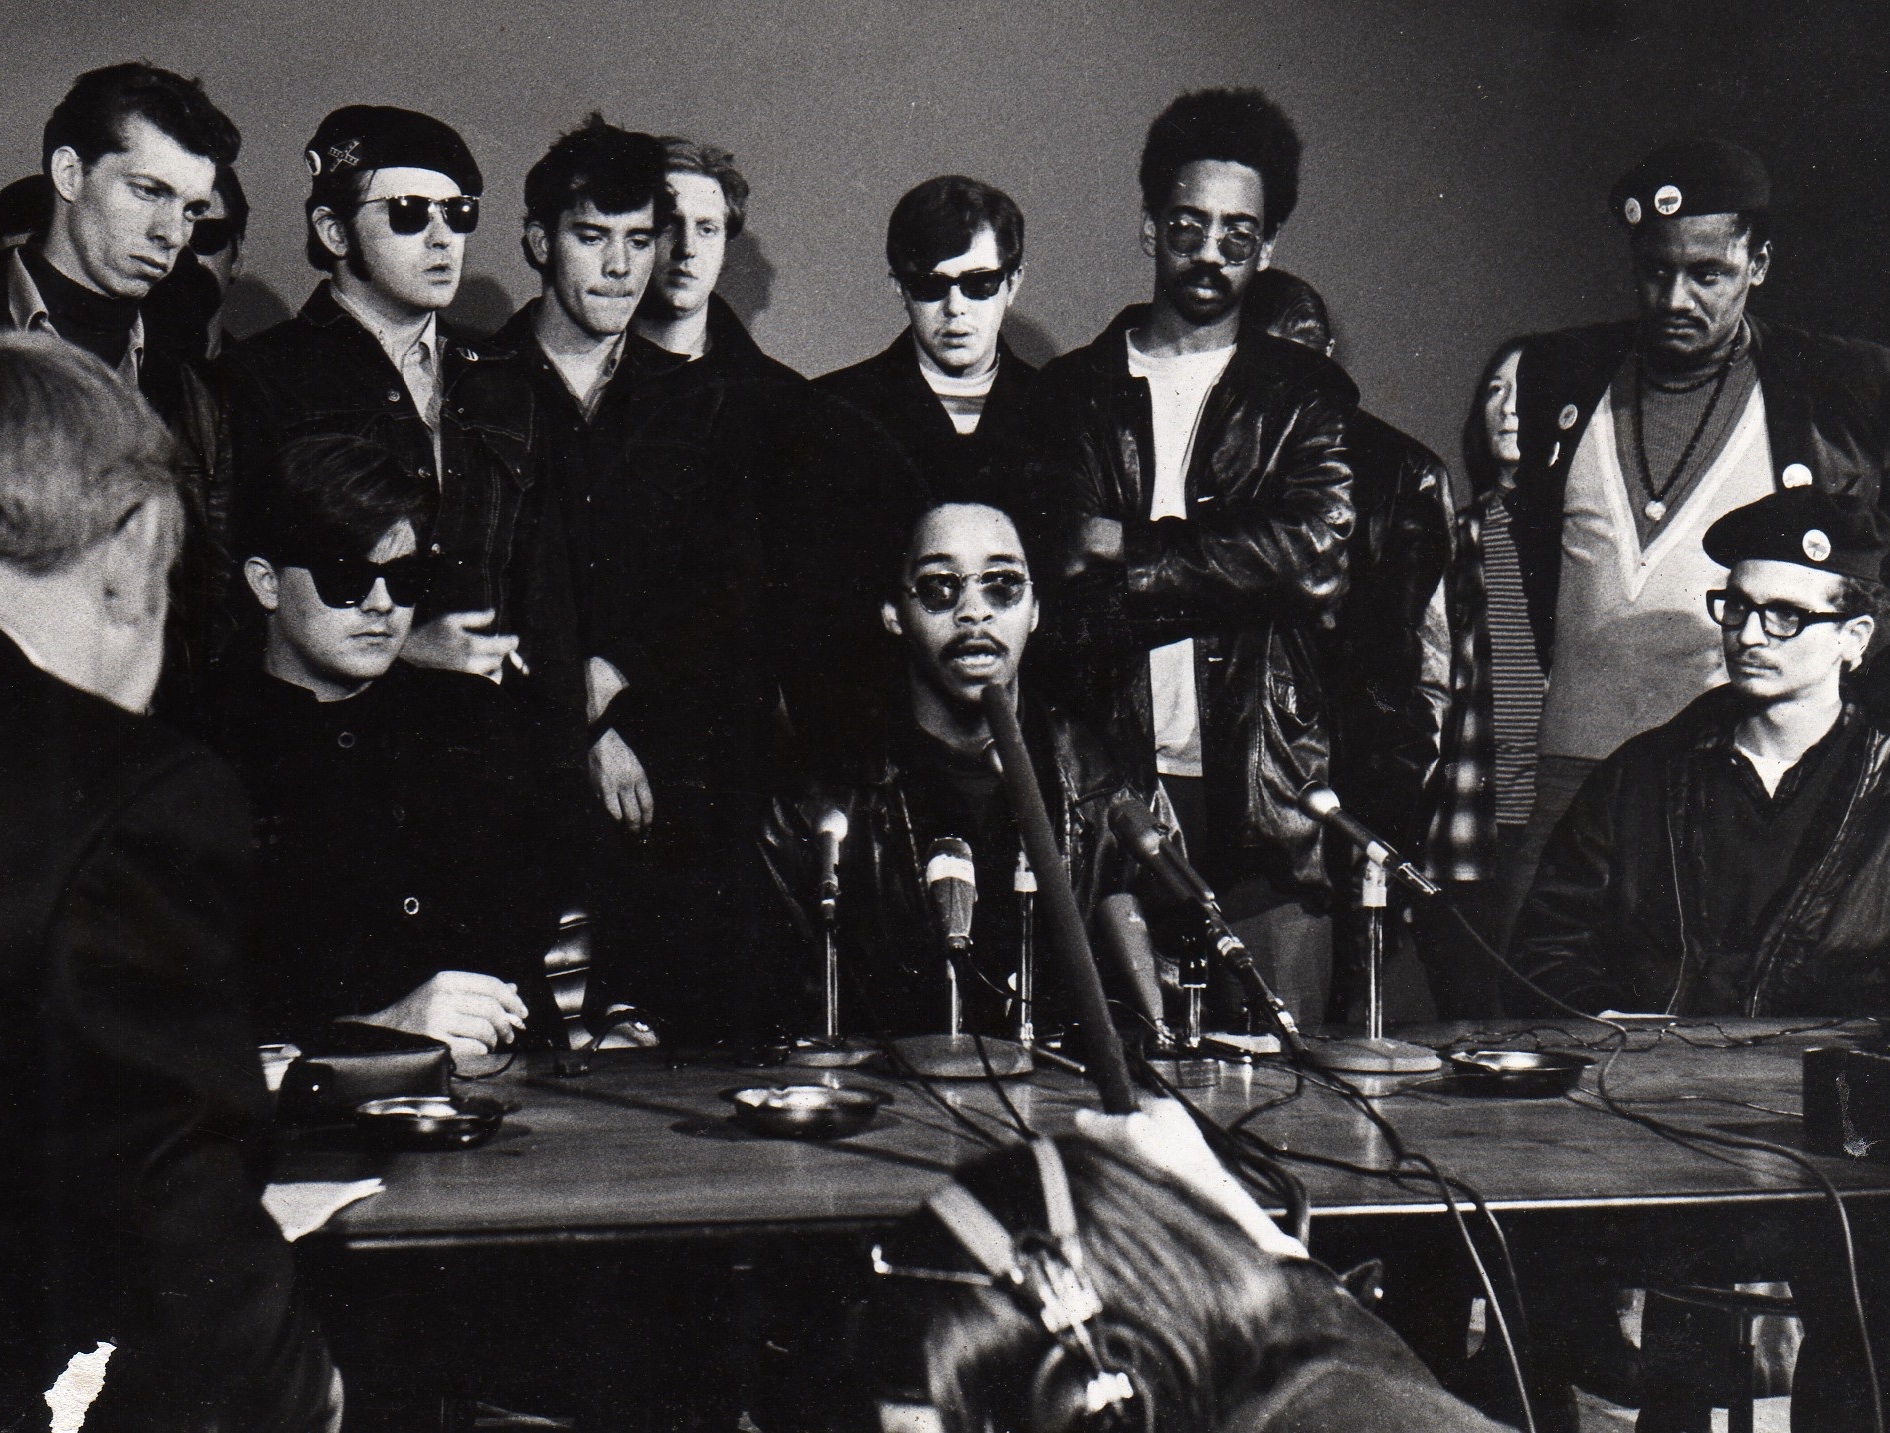 The Black Panthers and Young Patriots hold a press conference in 1969 / credit: Linn Ehrlich